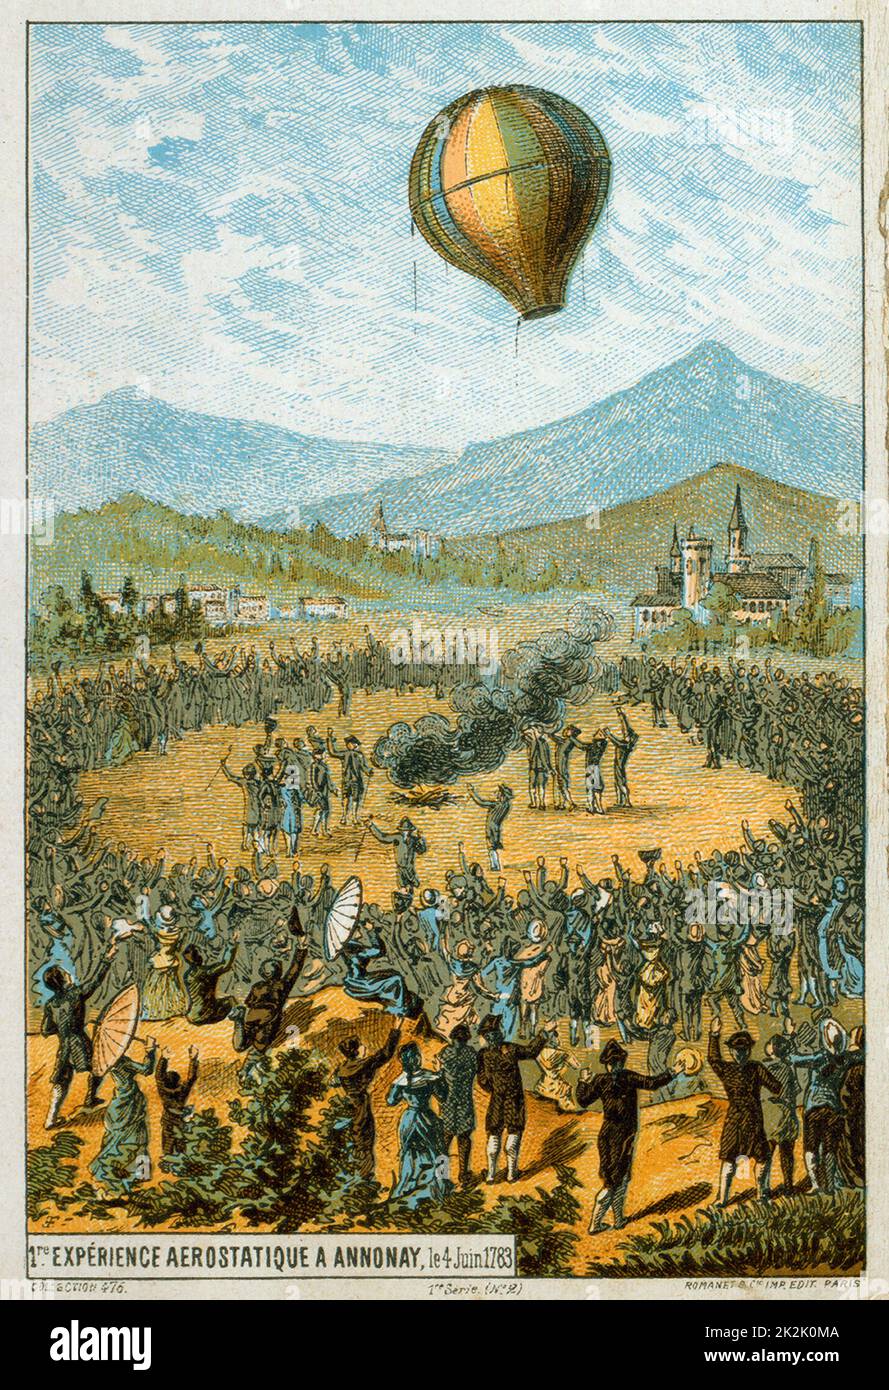 Joseph-Michel and Jacques-Etienne Montgolfier, French brothers, inventors of hot air balloon. From collecting card celebrating the centenary of their first public demonstration at Annonay 4 June 1783. Aeronautics Flying Aviation Ballooning Stock Photo